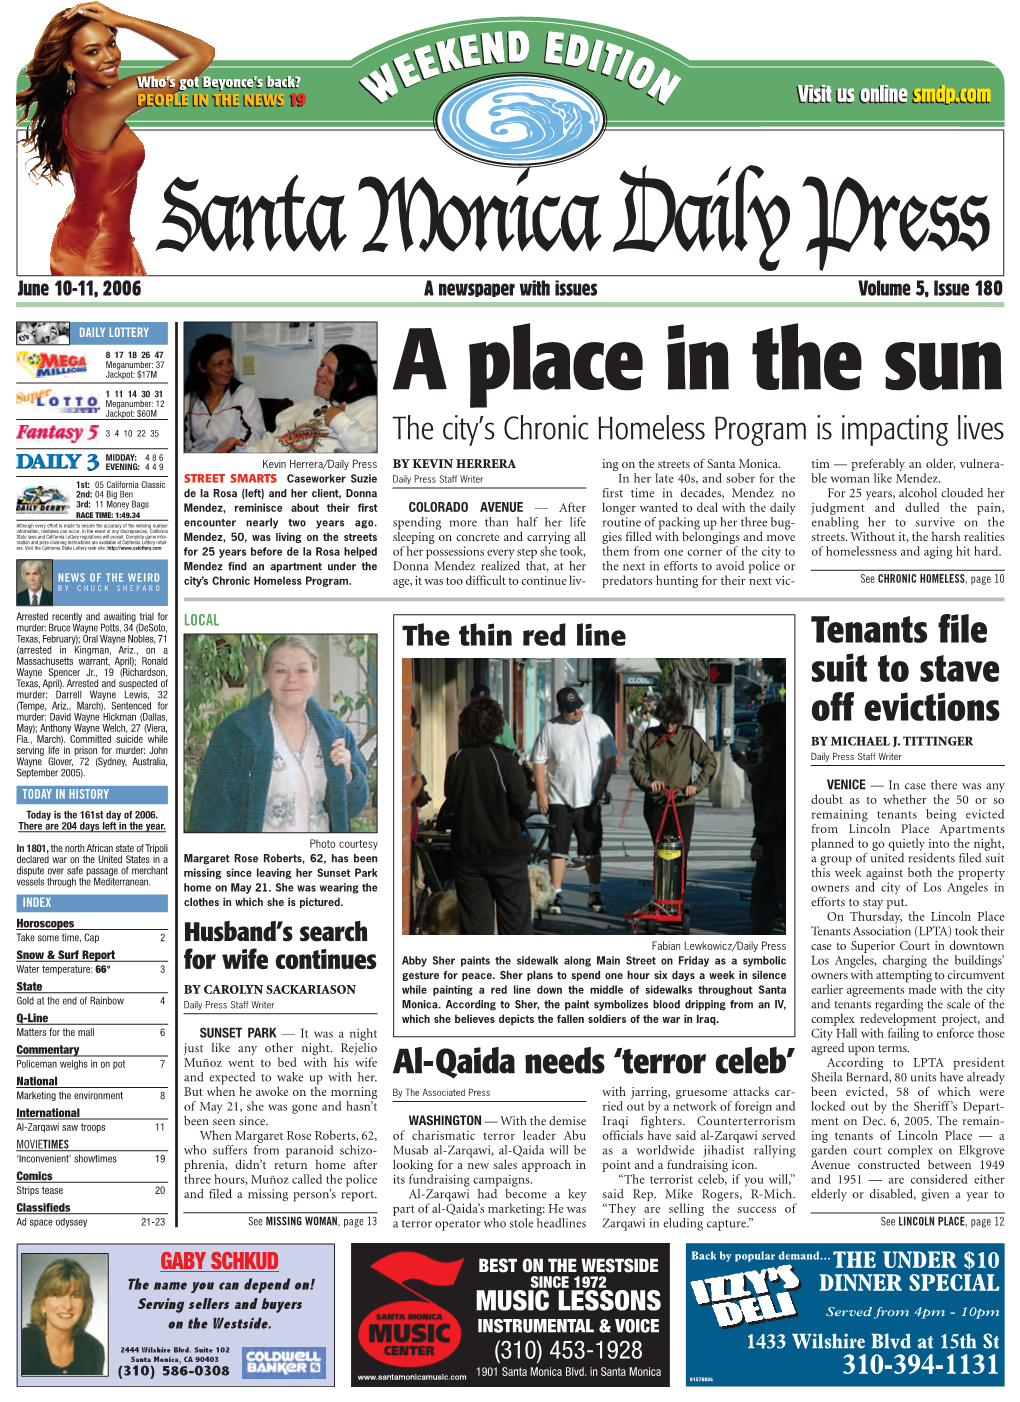 Santa Monica Daily Press June 10-11, 2006 a Newspaper with Issues Volume 5, Issue 180